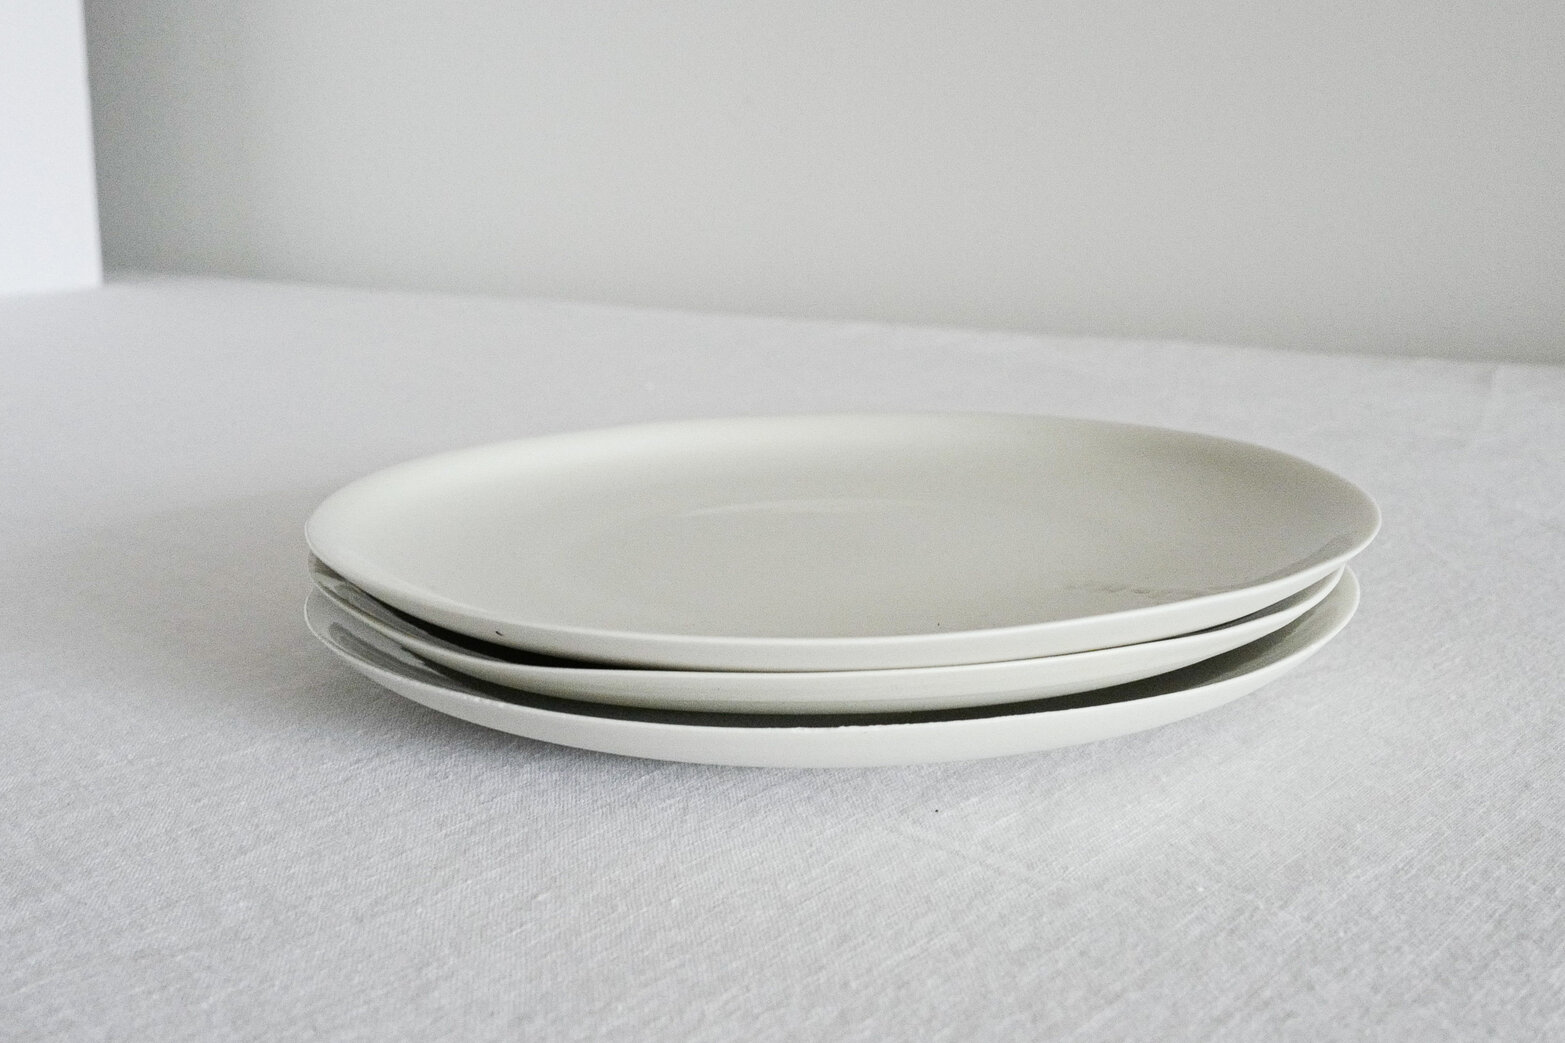 Bset large plate